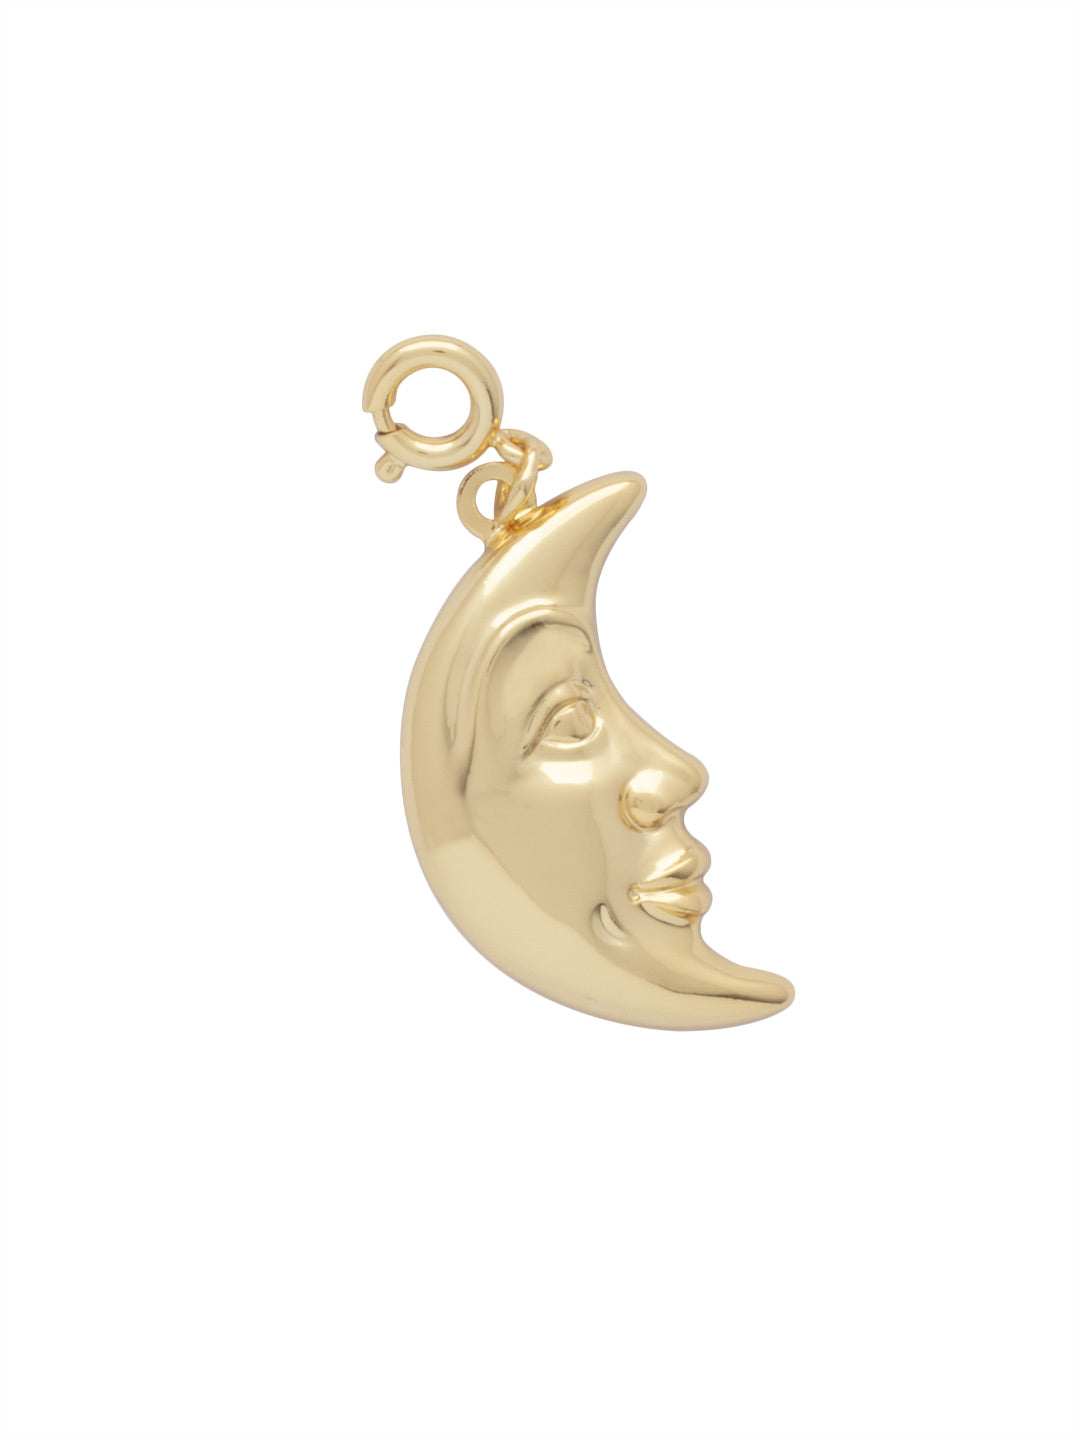 Moon Charm - CFG21BGMTL - <p>Metal moon charm with a spring ring clasp. From Sorrelli's Bare Metallic collection in our Bright Gold-tone finish.</p>